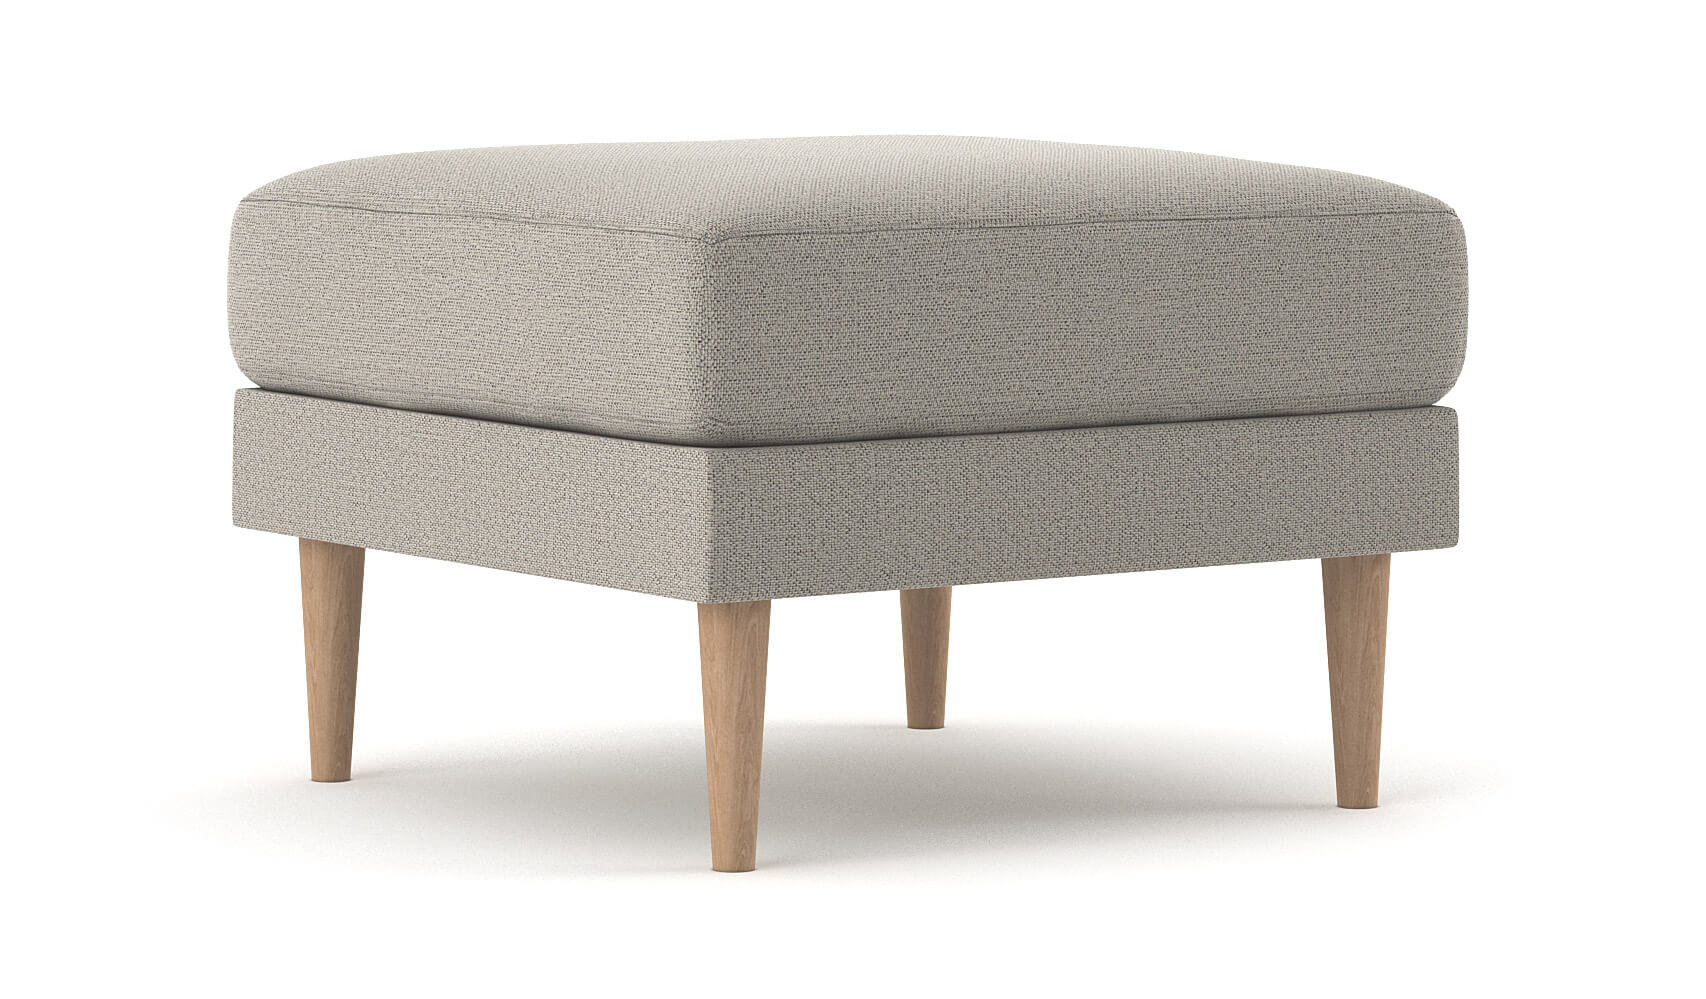 Shown in Texture Haze fabric and maple legs